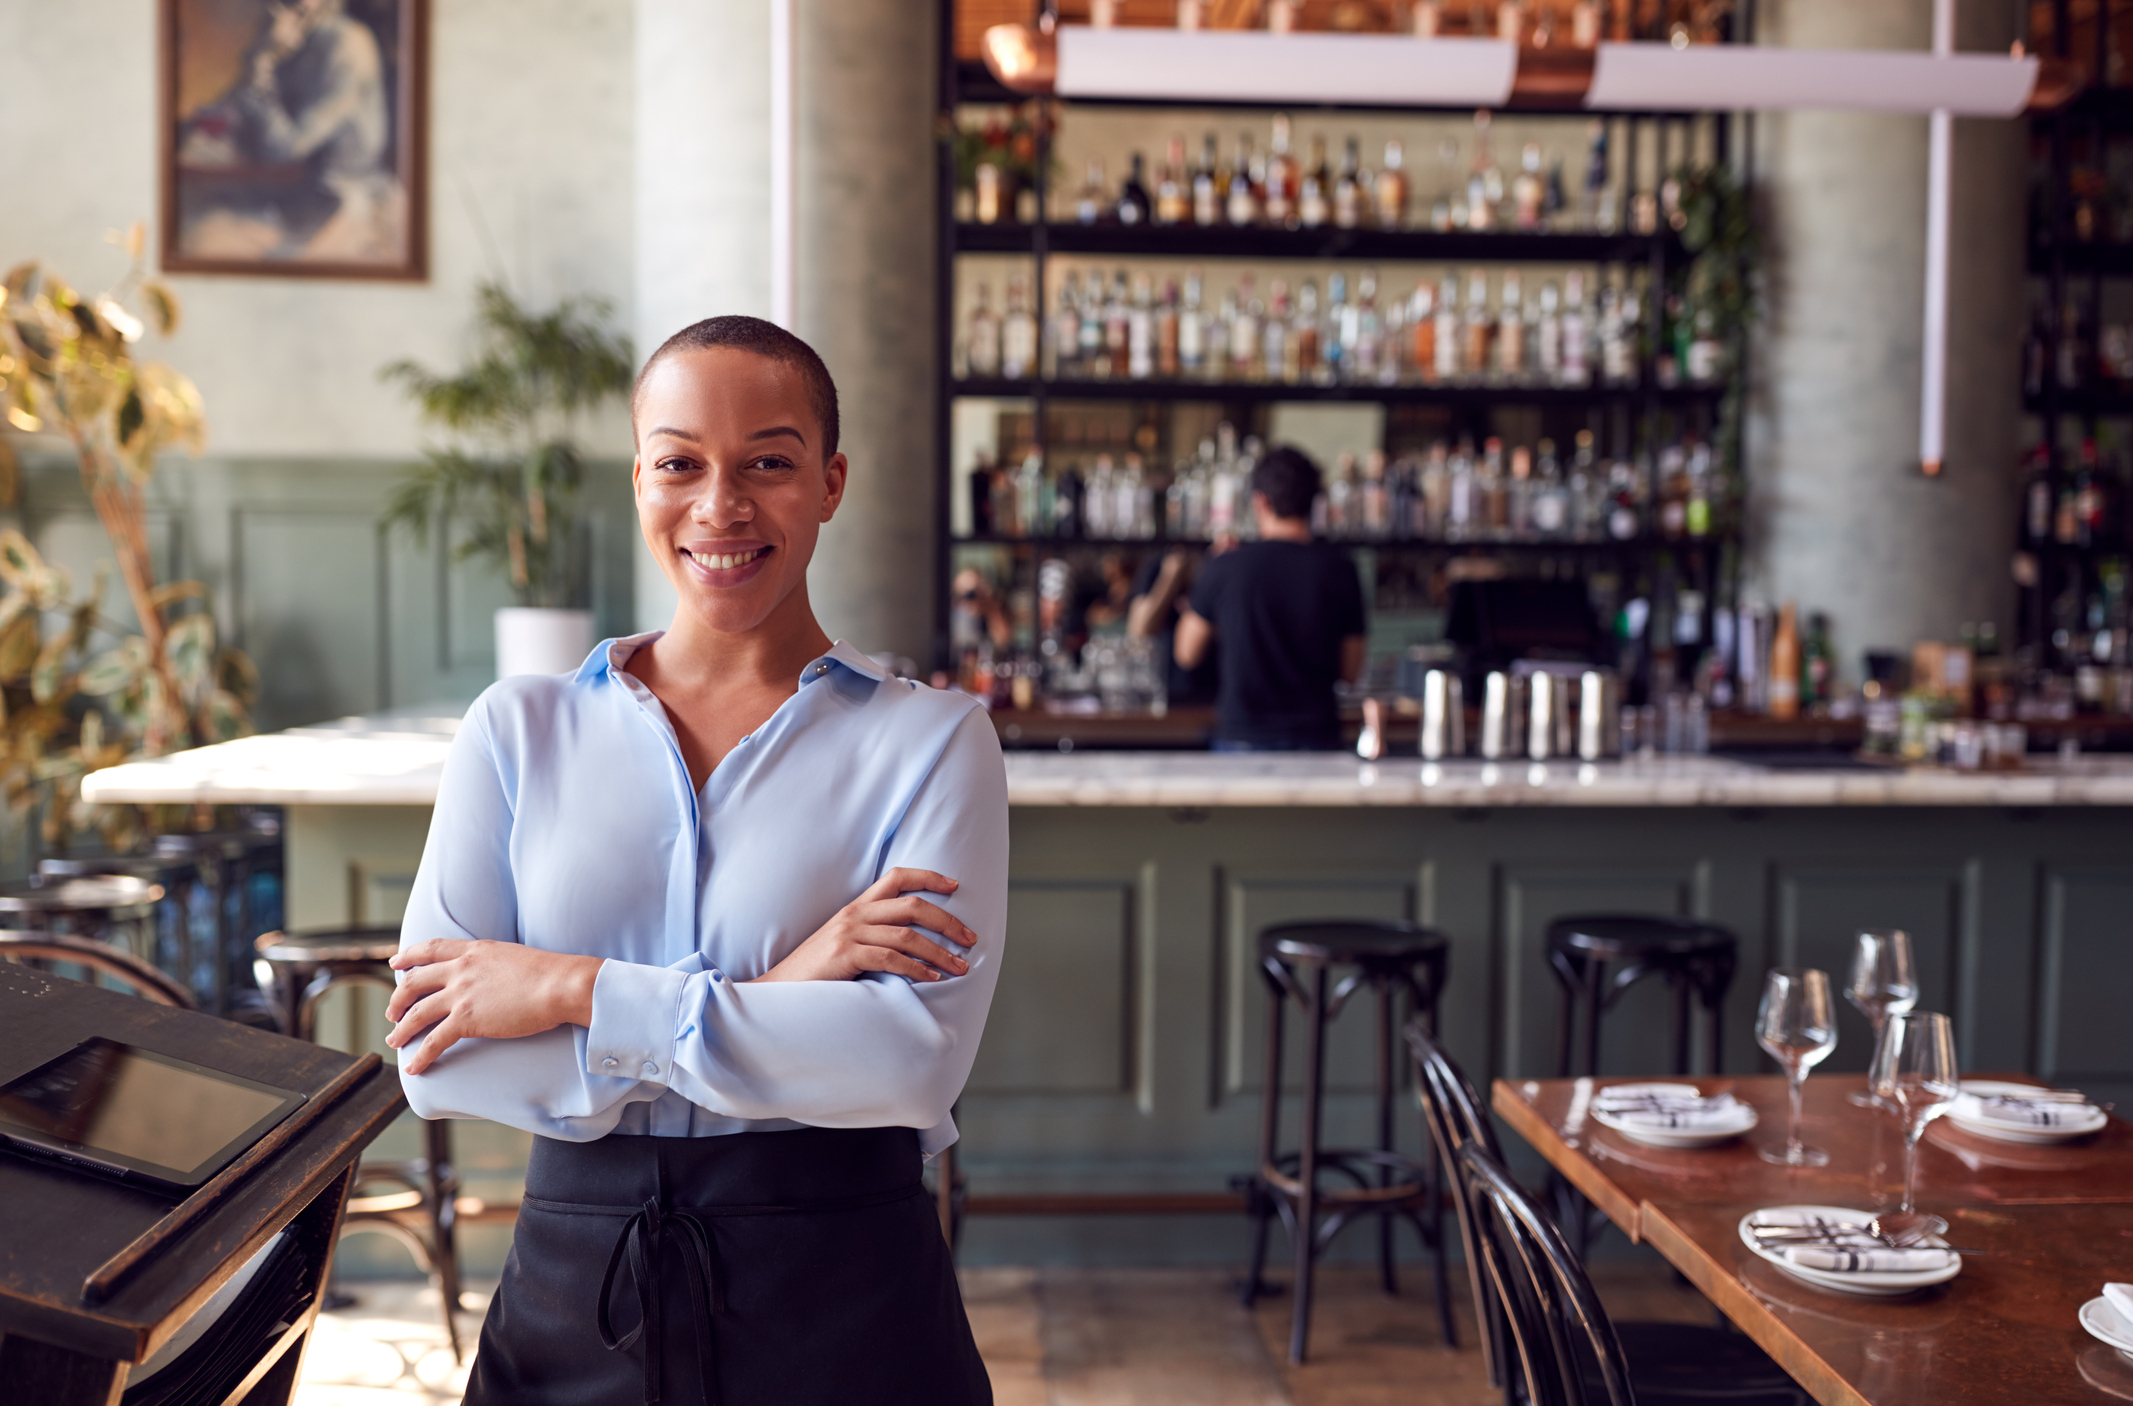 A professional woman smiling in a restaurant